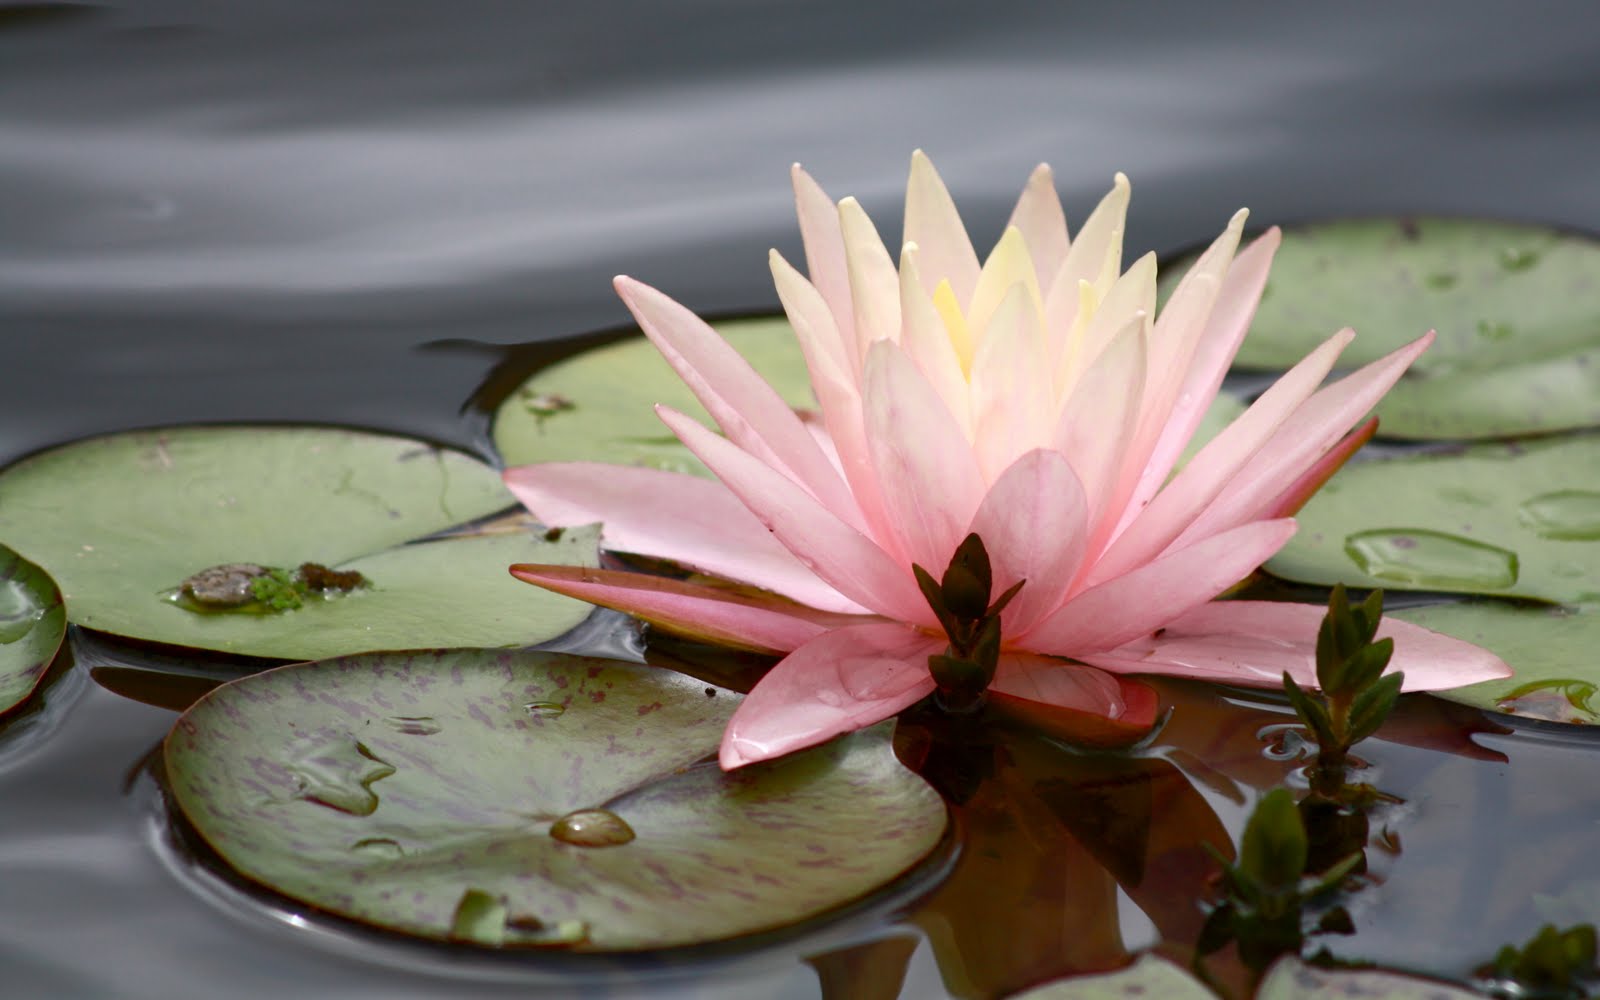 flowers for flower lovers.: water lilly flowers.
